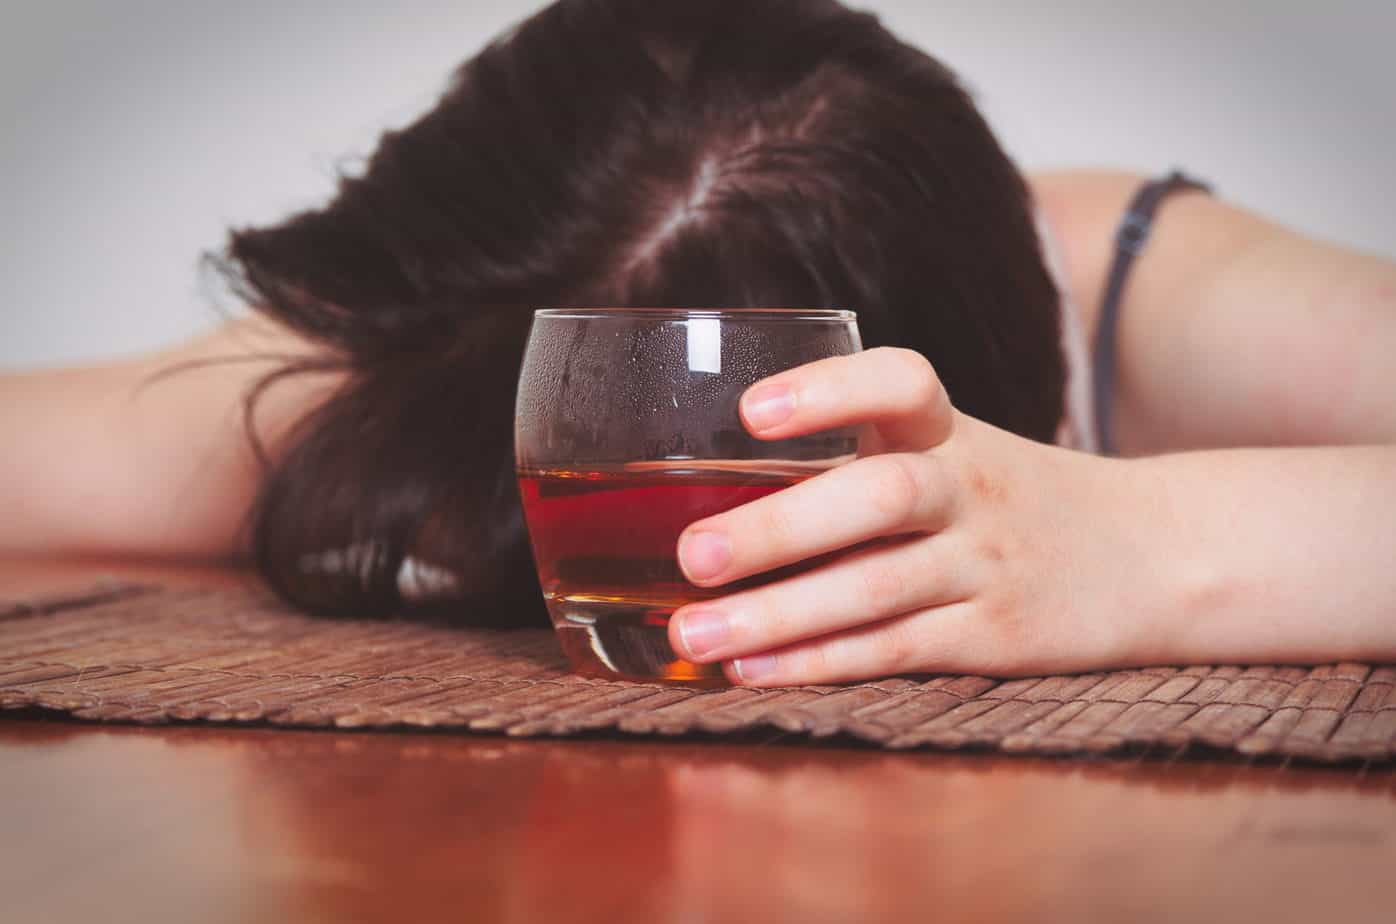  Drinking too much can alter levels of these nutrients and affect the spread of alcoholic neuropathy.